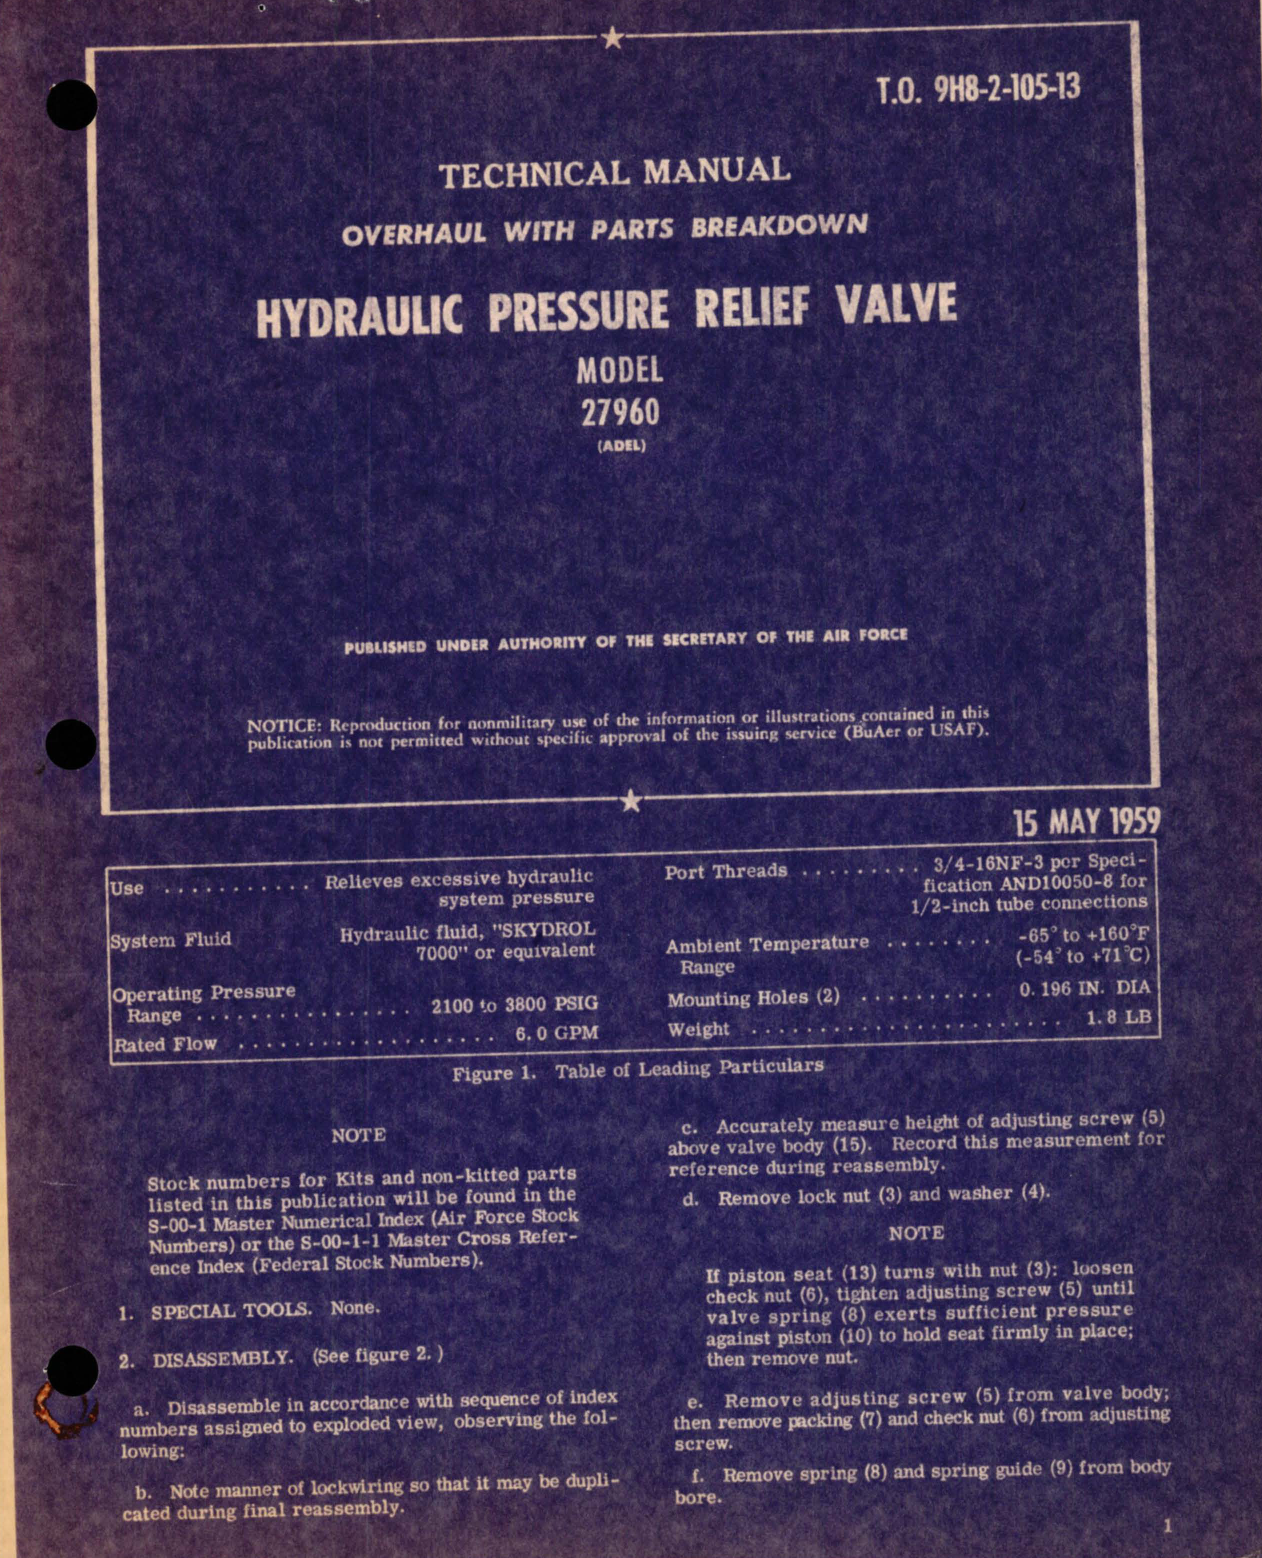 Sample page 1 from AirCorps Library document: Overhaul with Parts Breakdown for Hydraulic Pressure Relief Valve - Model 27960 